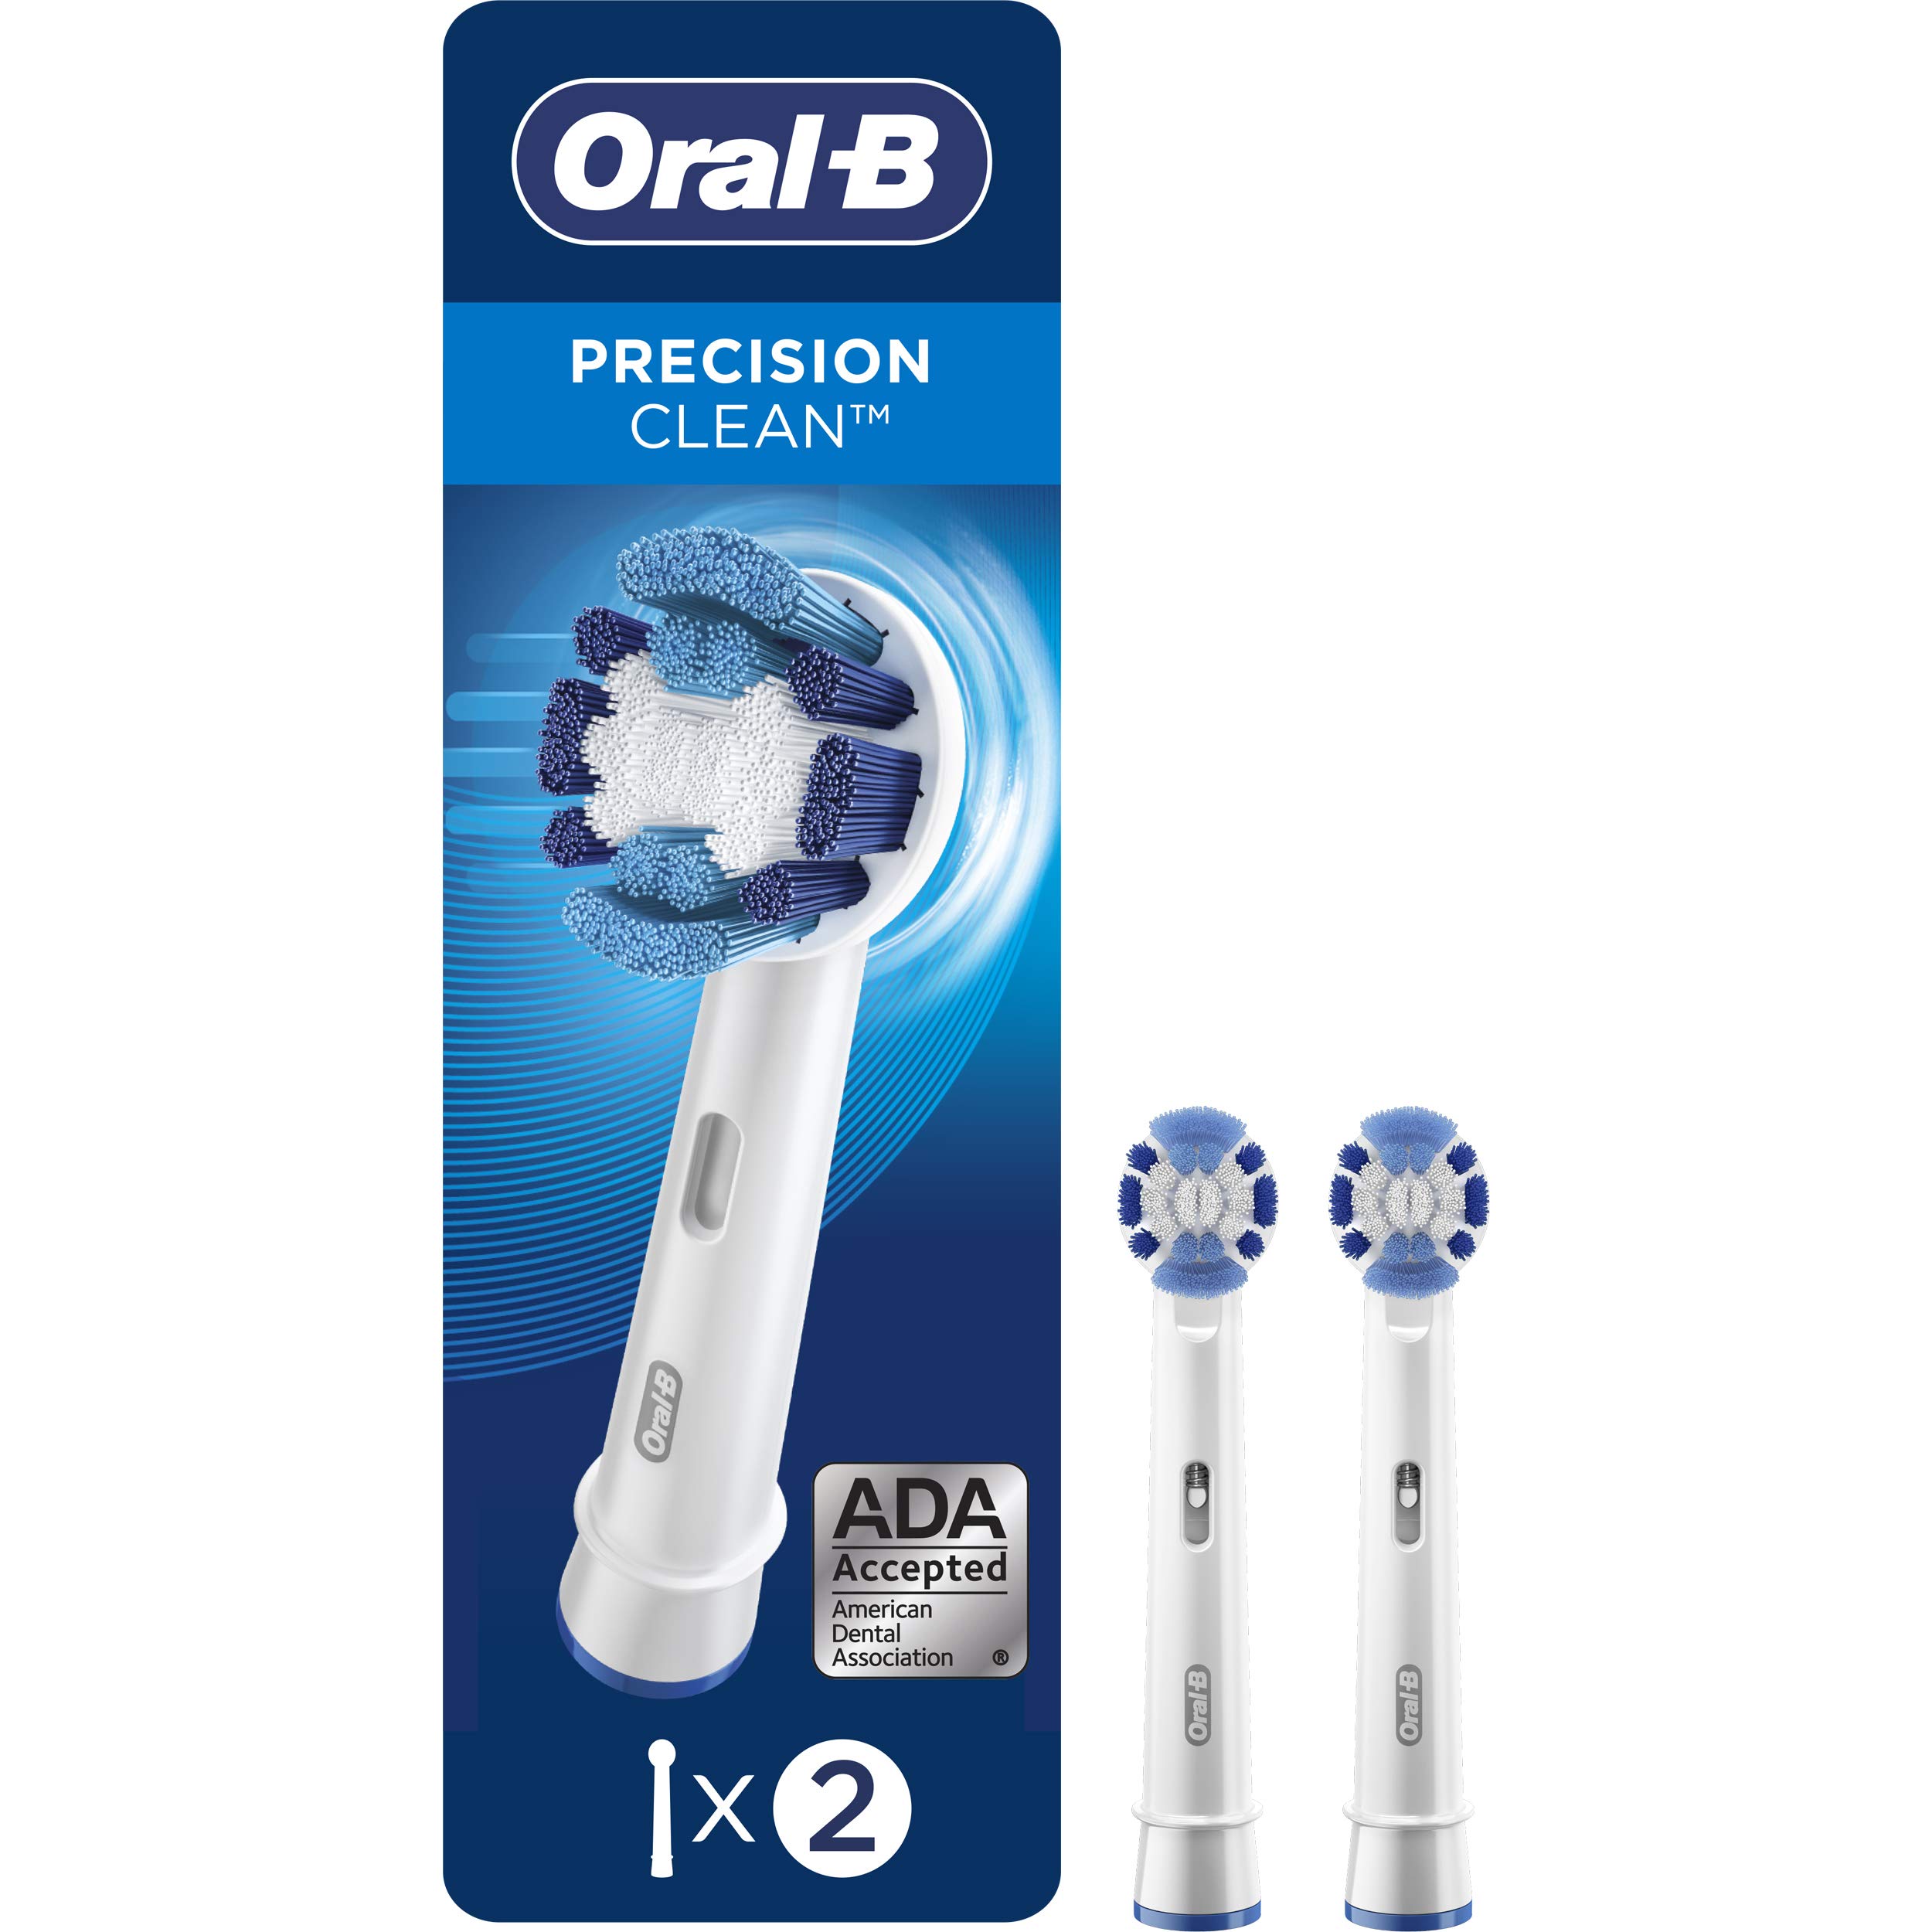 Tomaat weerstand bieden bord Oral-B Precision Clean Electric Toothbrush Replacement Brush Heads Refill,  2ct Toothbrush Refills (2ct)